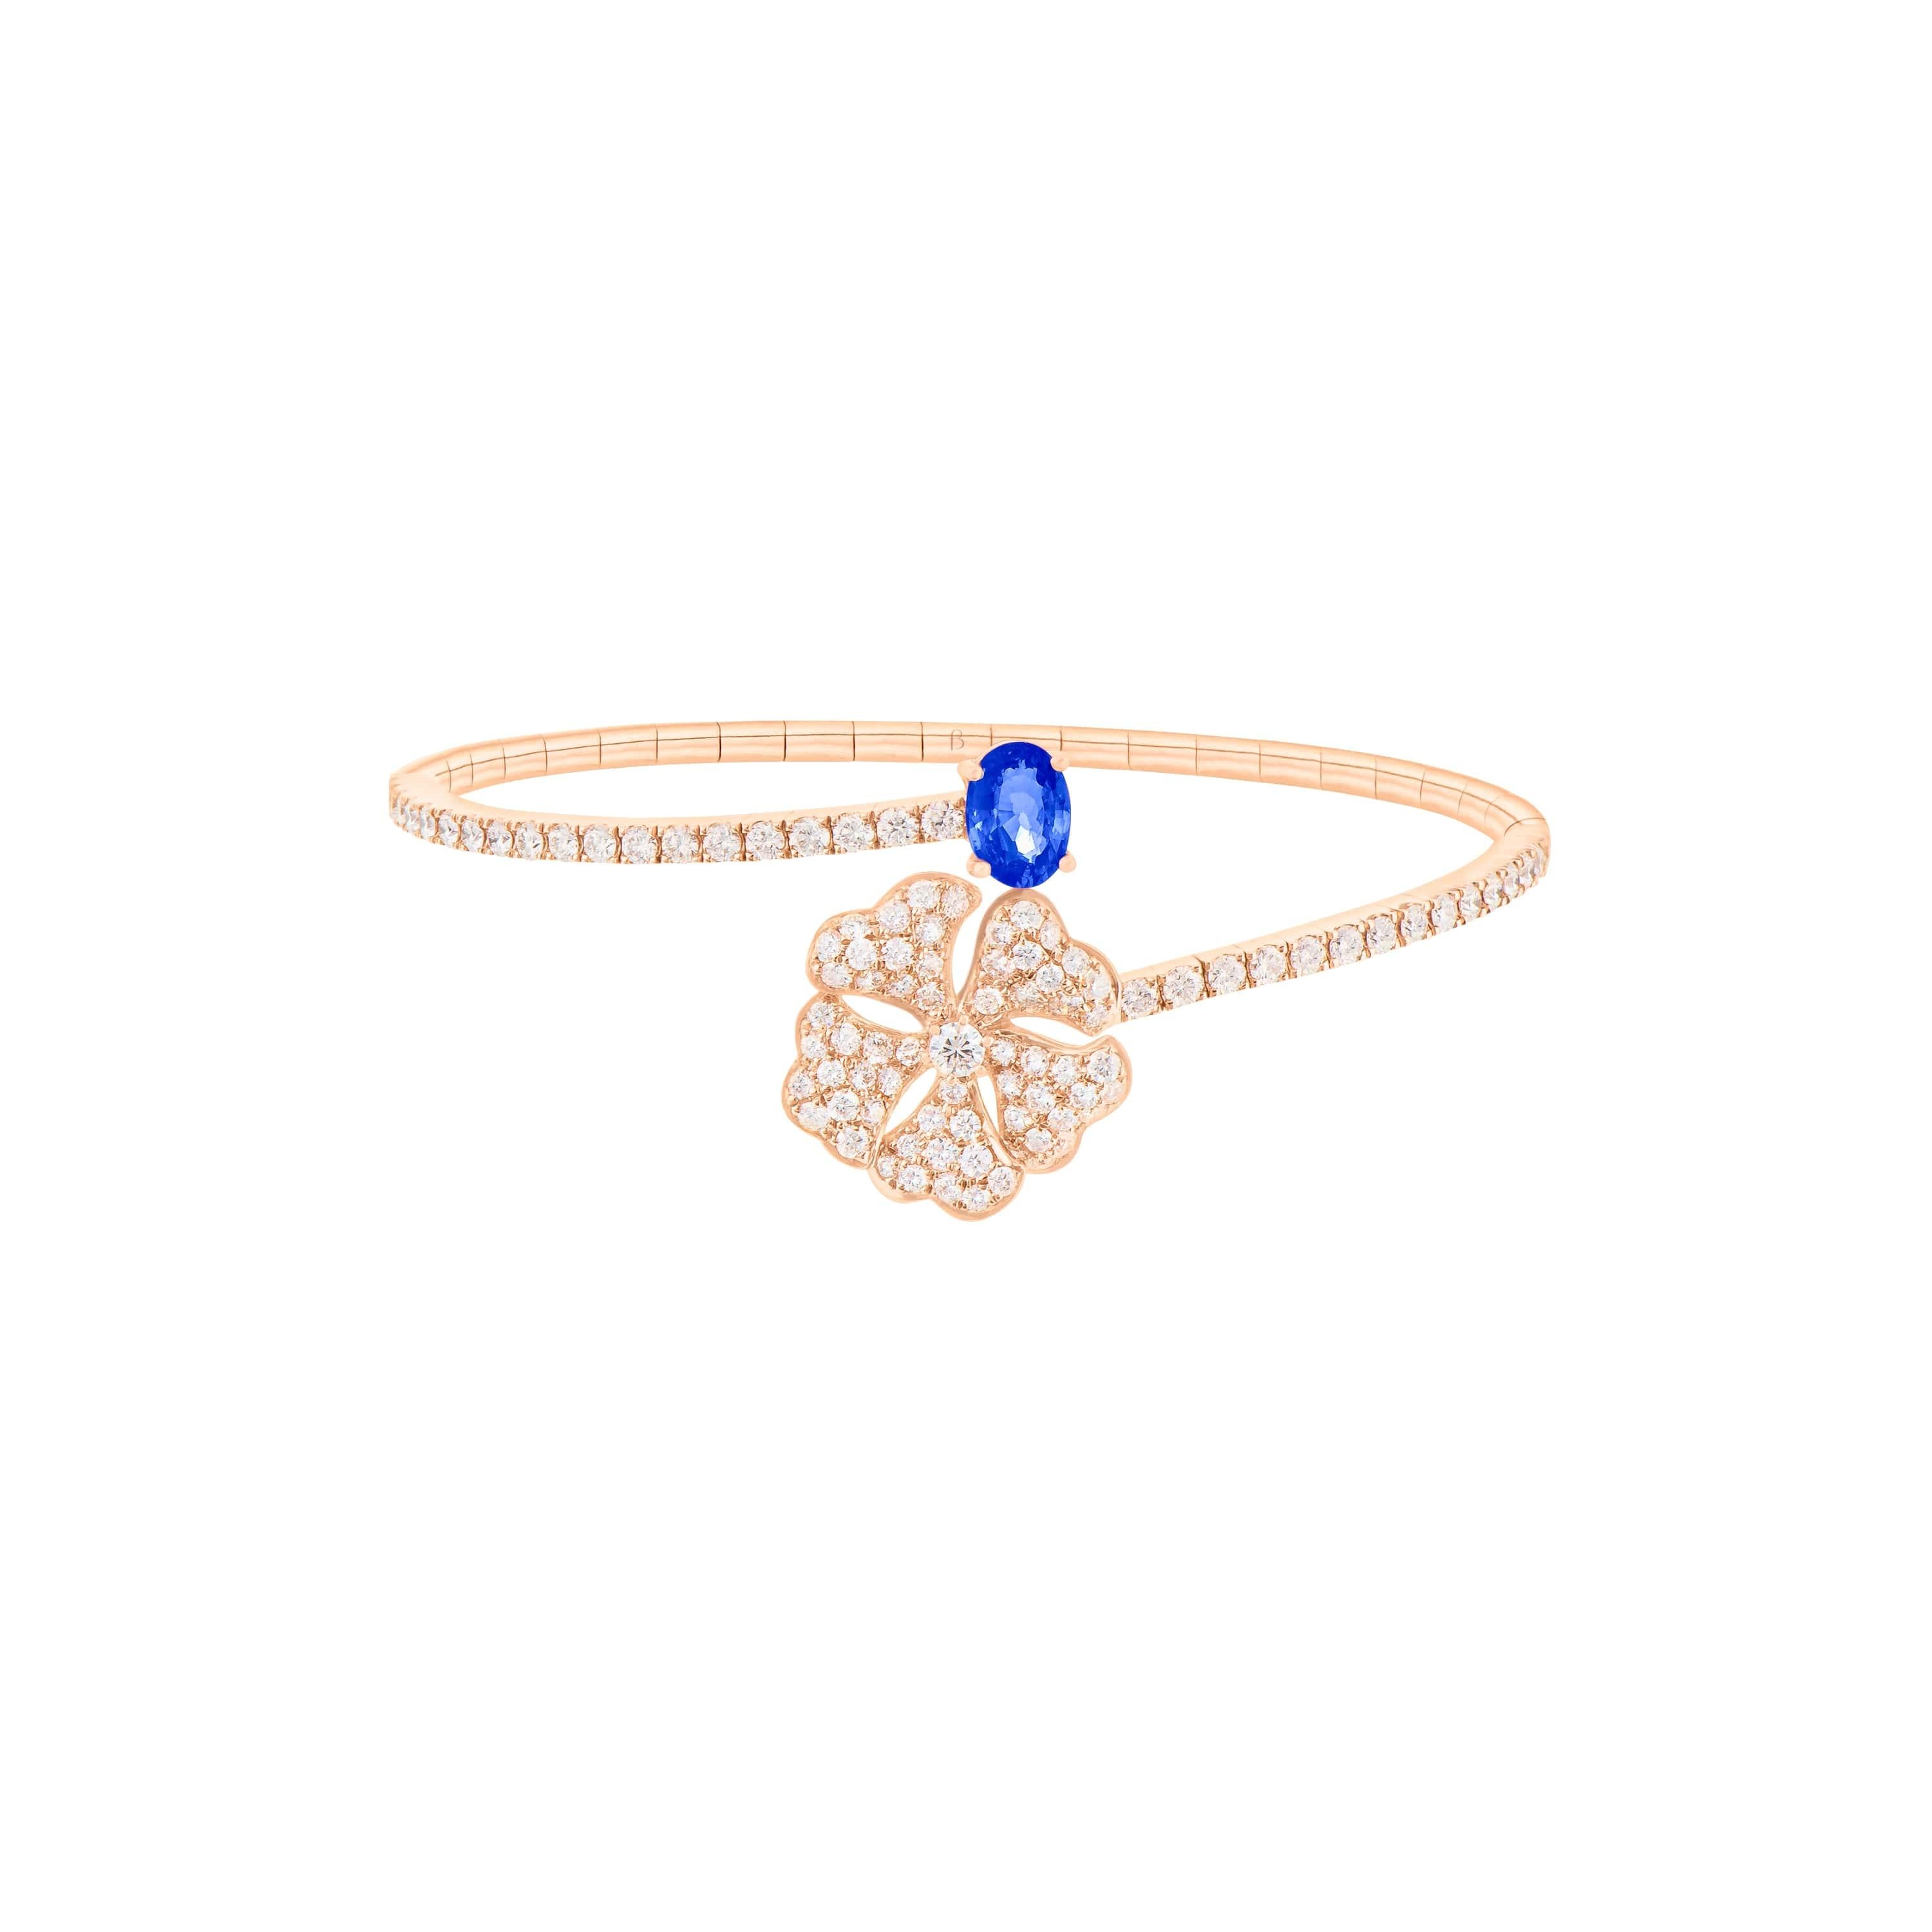 Bloom Blue Sapphire and Diamond Open Spiral Bangle in 18K Rose Gold

Inspired by the exquisite petals of the alpine cinquefoil flower, the Bloom collection combines the richness of diamonds and precious metals with the light versatility of this